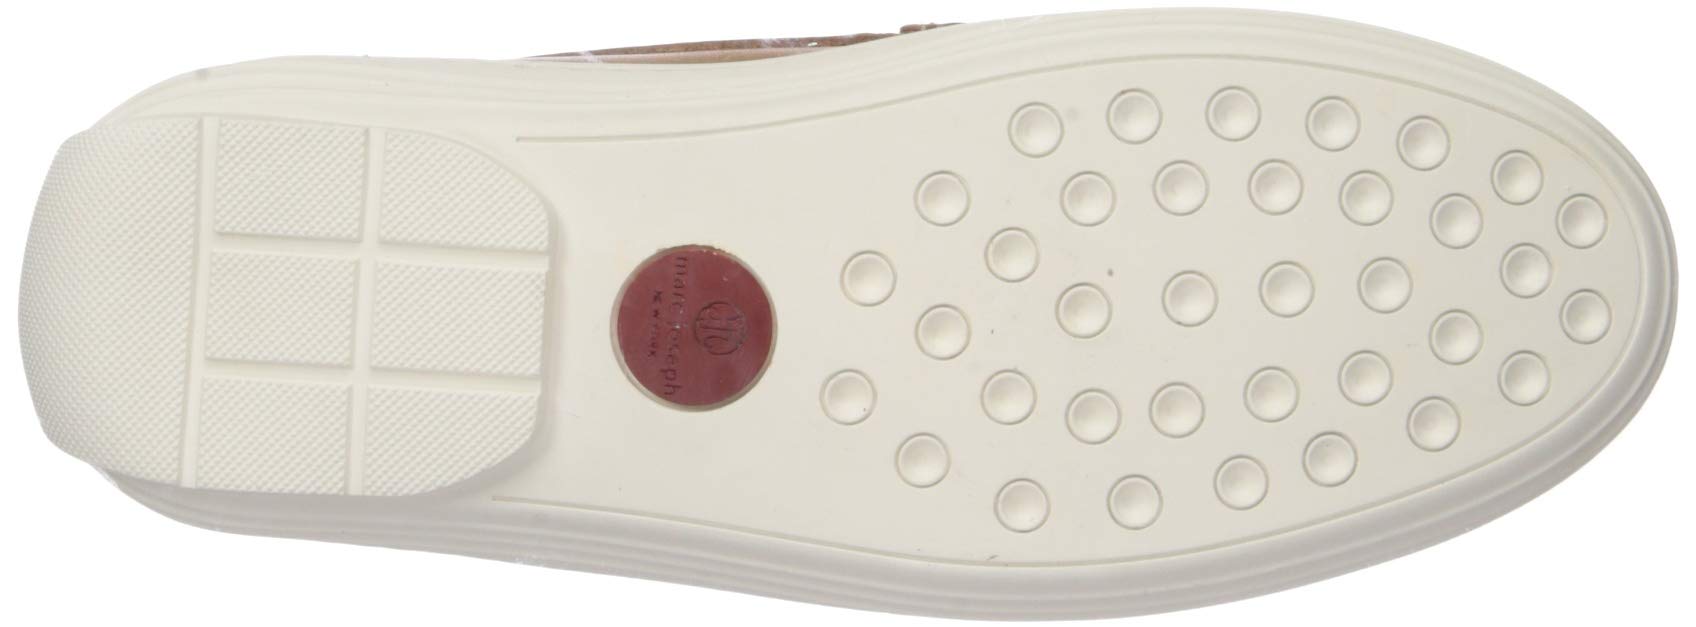 MARC JOSEPH NEW YORK Unisex-Child Leather Driver with Gold Star Detail Loafer